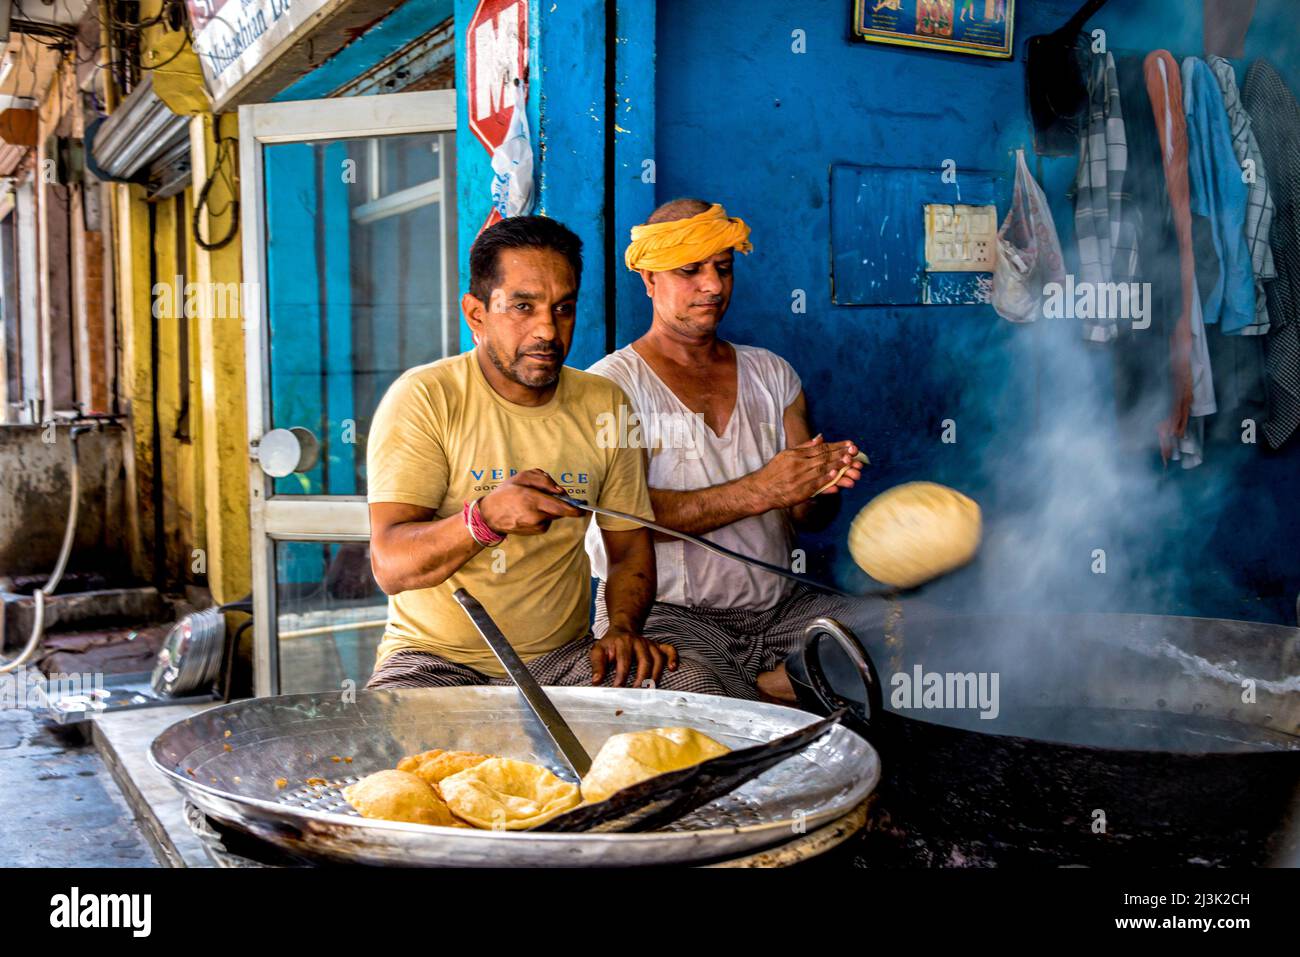 Men making traditional Indian food at a street stall in India, deep fried fluffed bread; Amritsar, Punjab, India Stock Photo